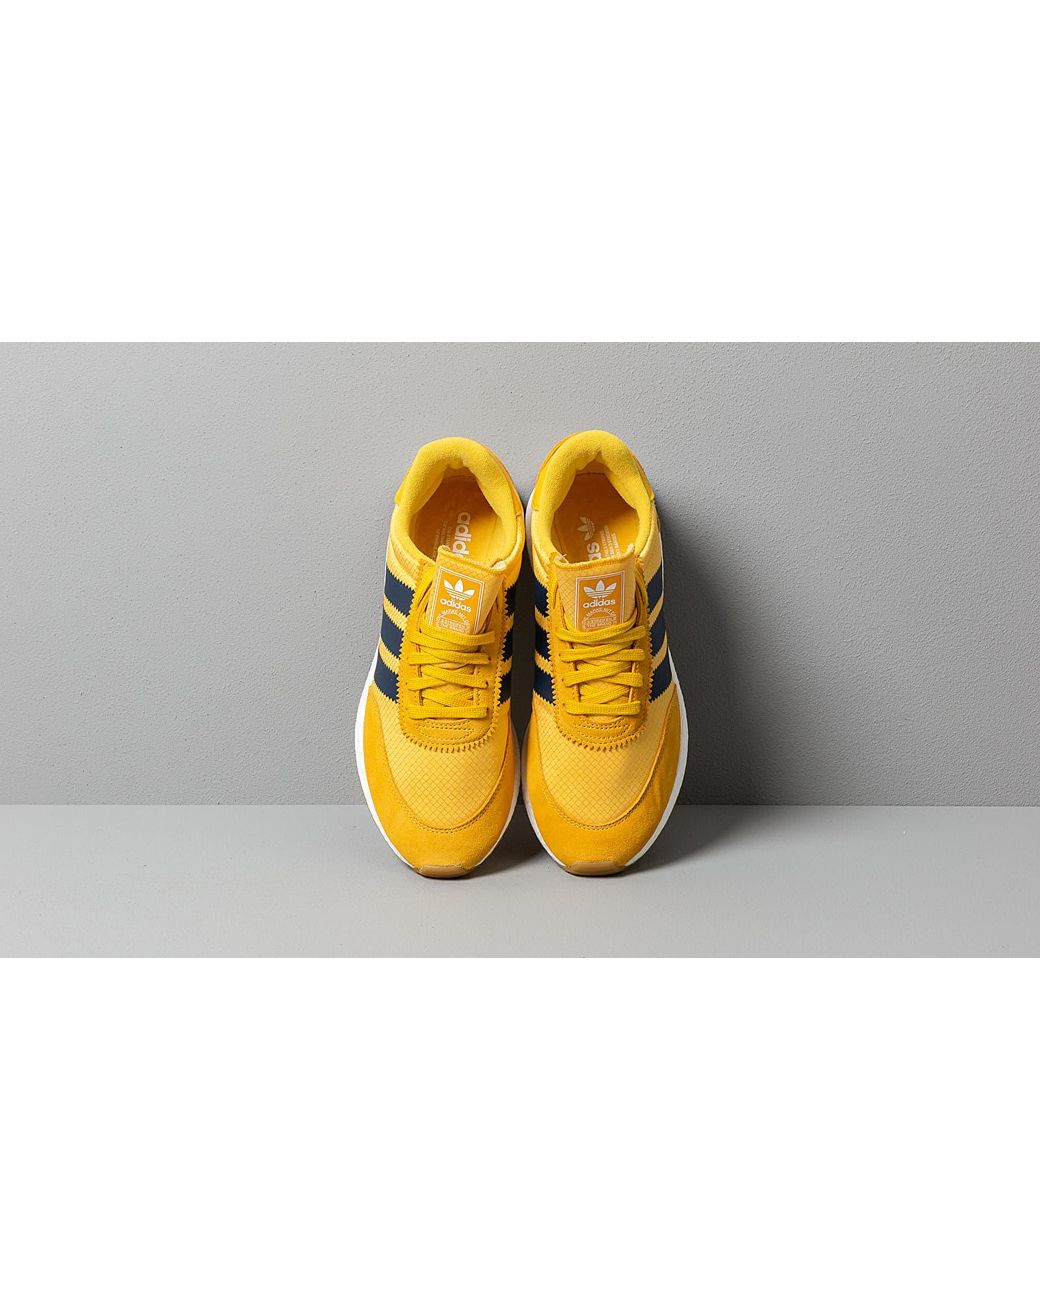 adidas I-5923 Shoes in Yellow | Lyst